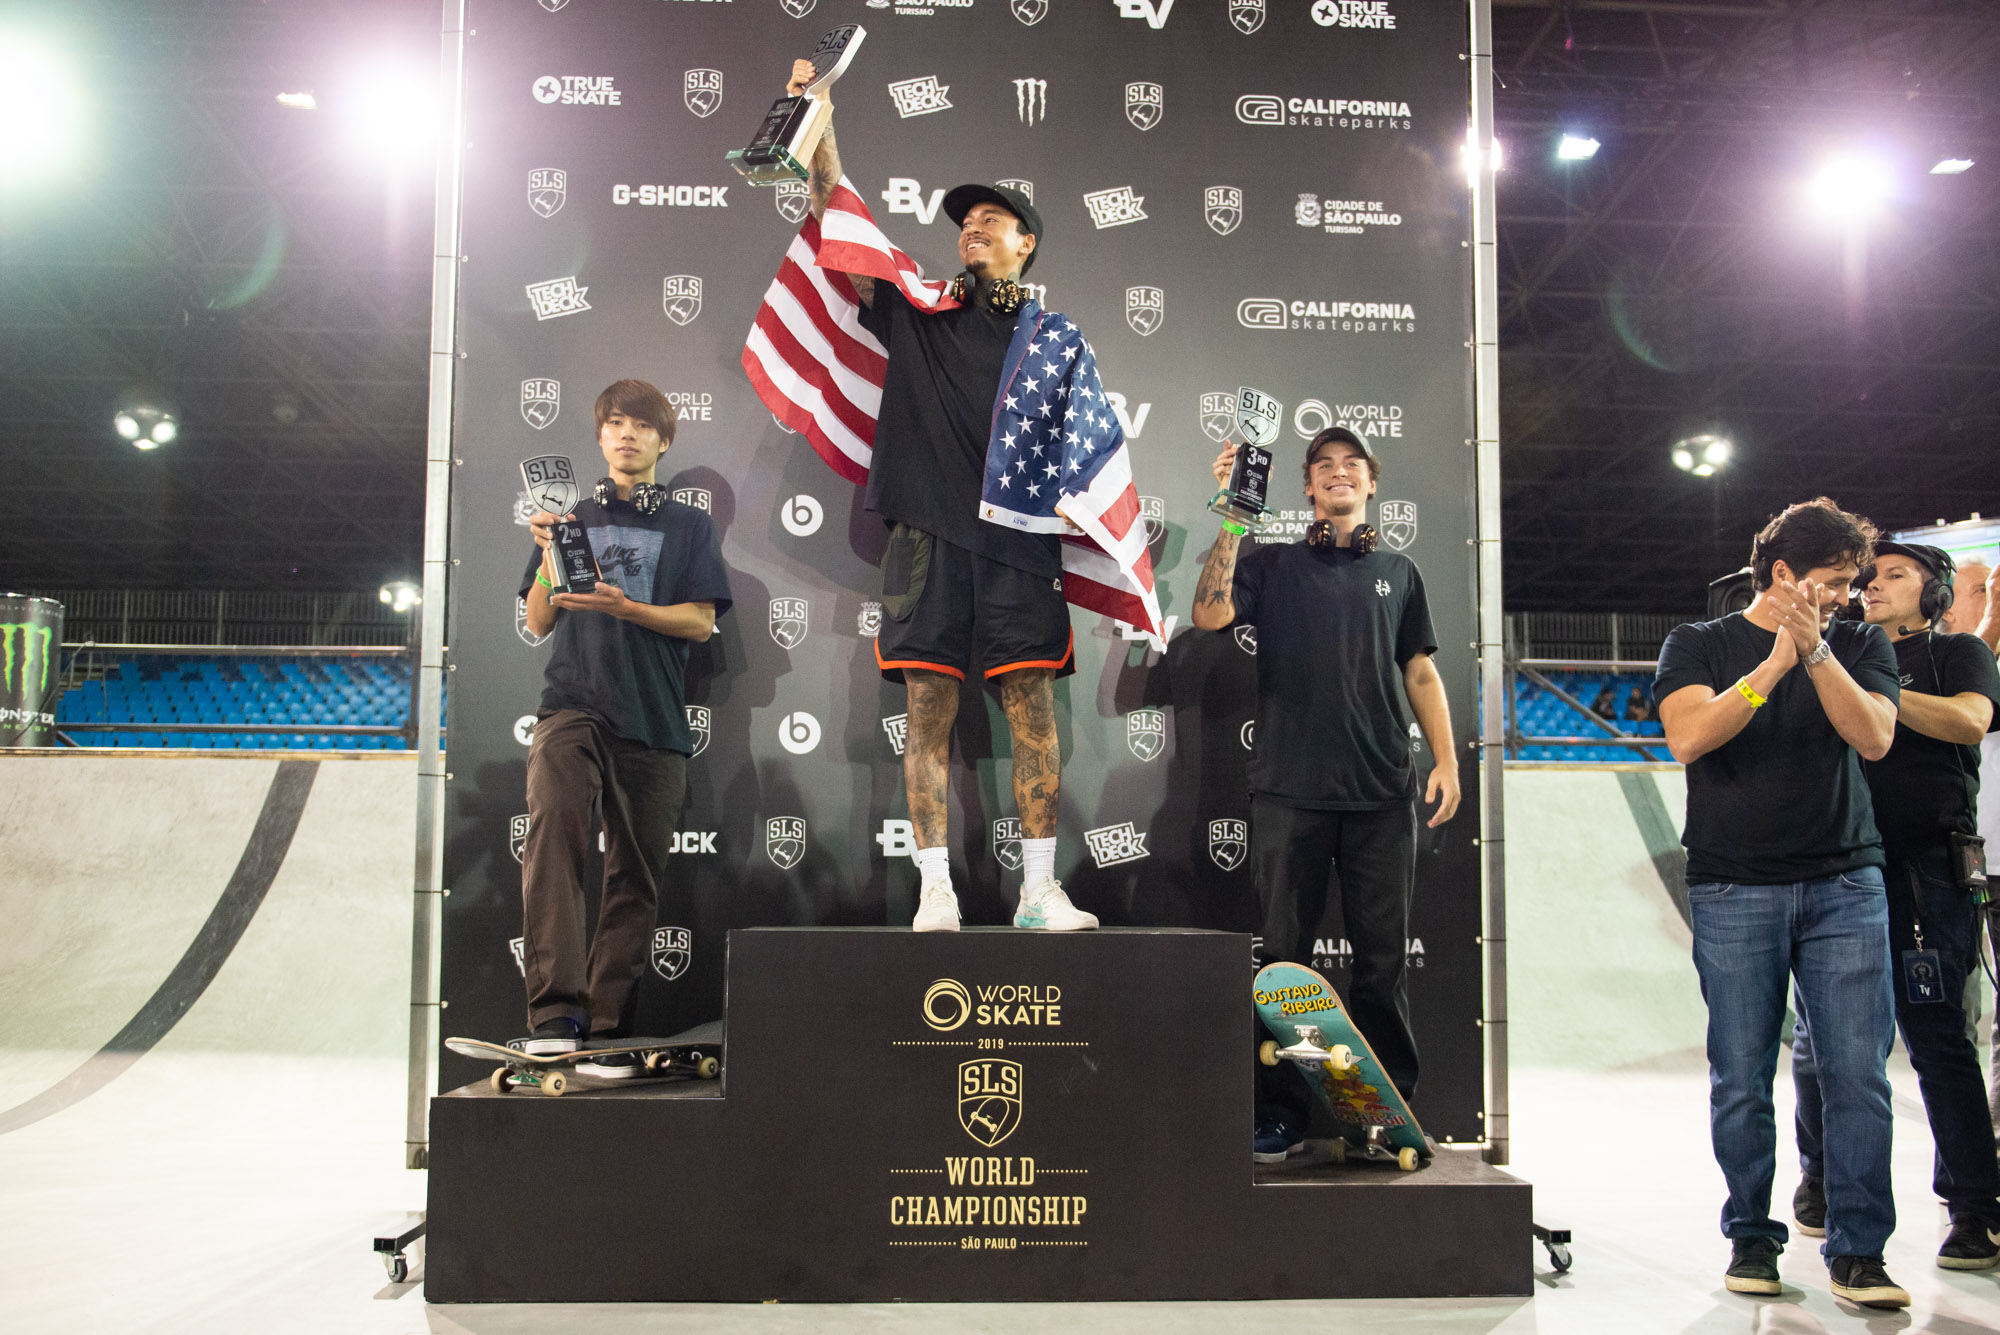 Monster Energy’s Nyjah Huston Takes First Place at the 2019 SLS World Championship in São Paulo